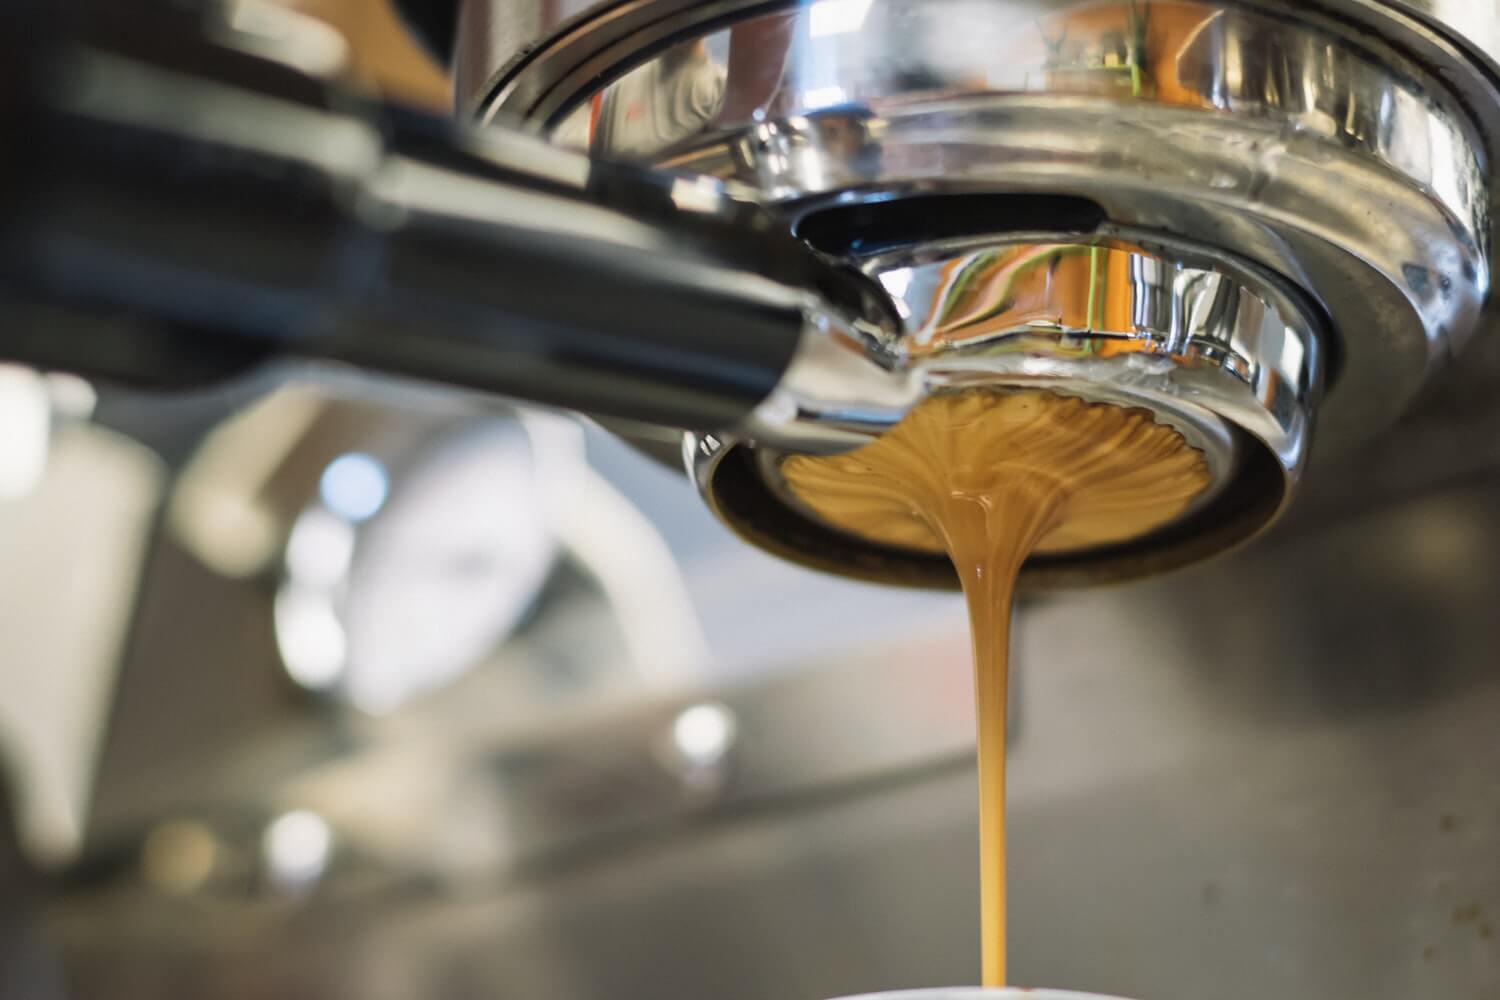 a close up image of coffee coming out of a coffee machine